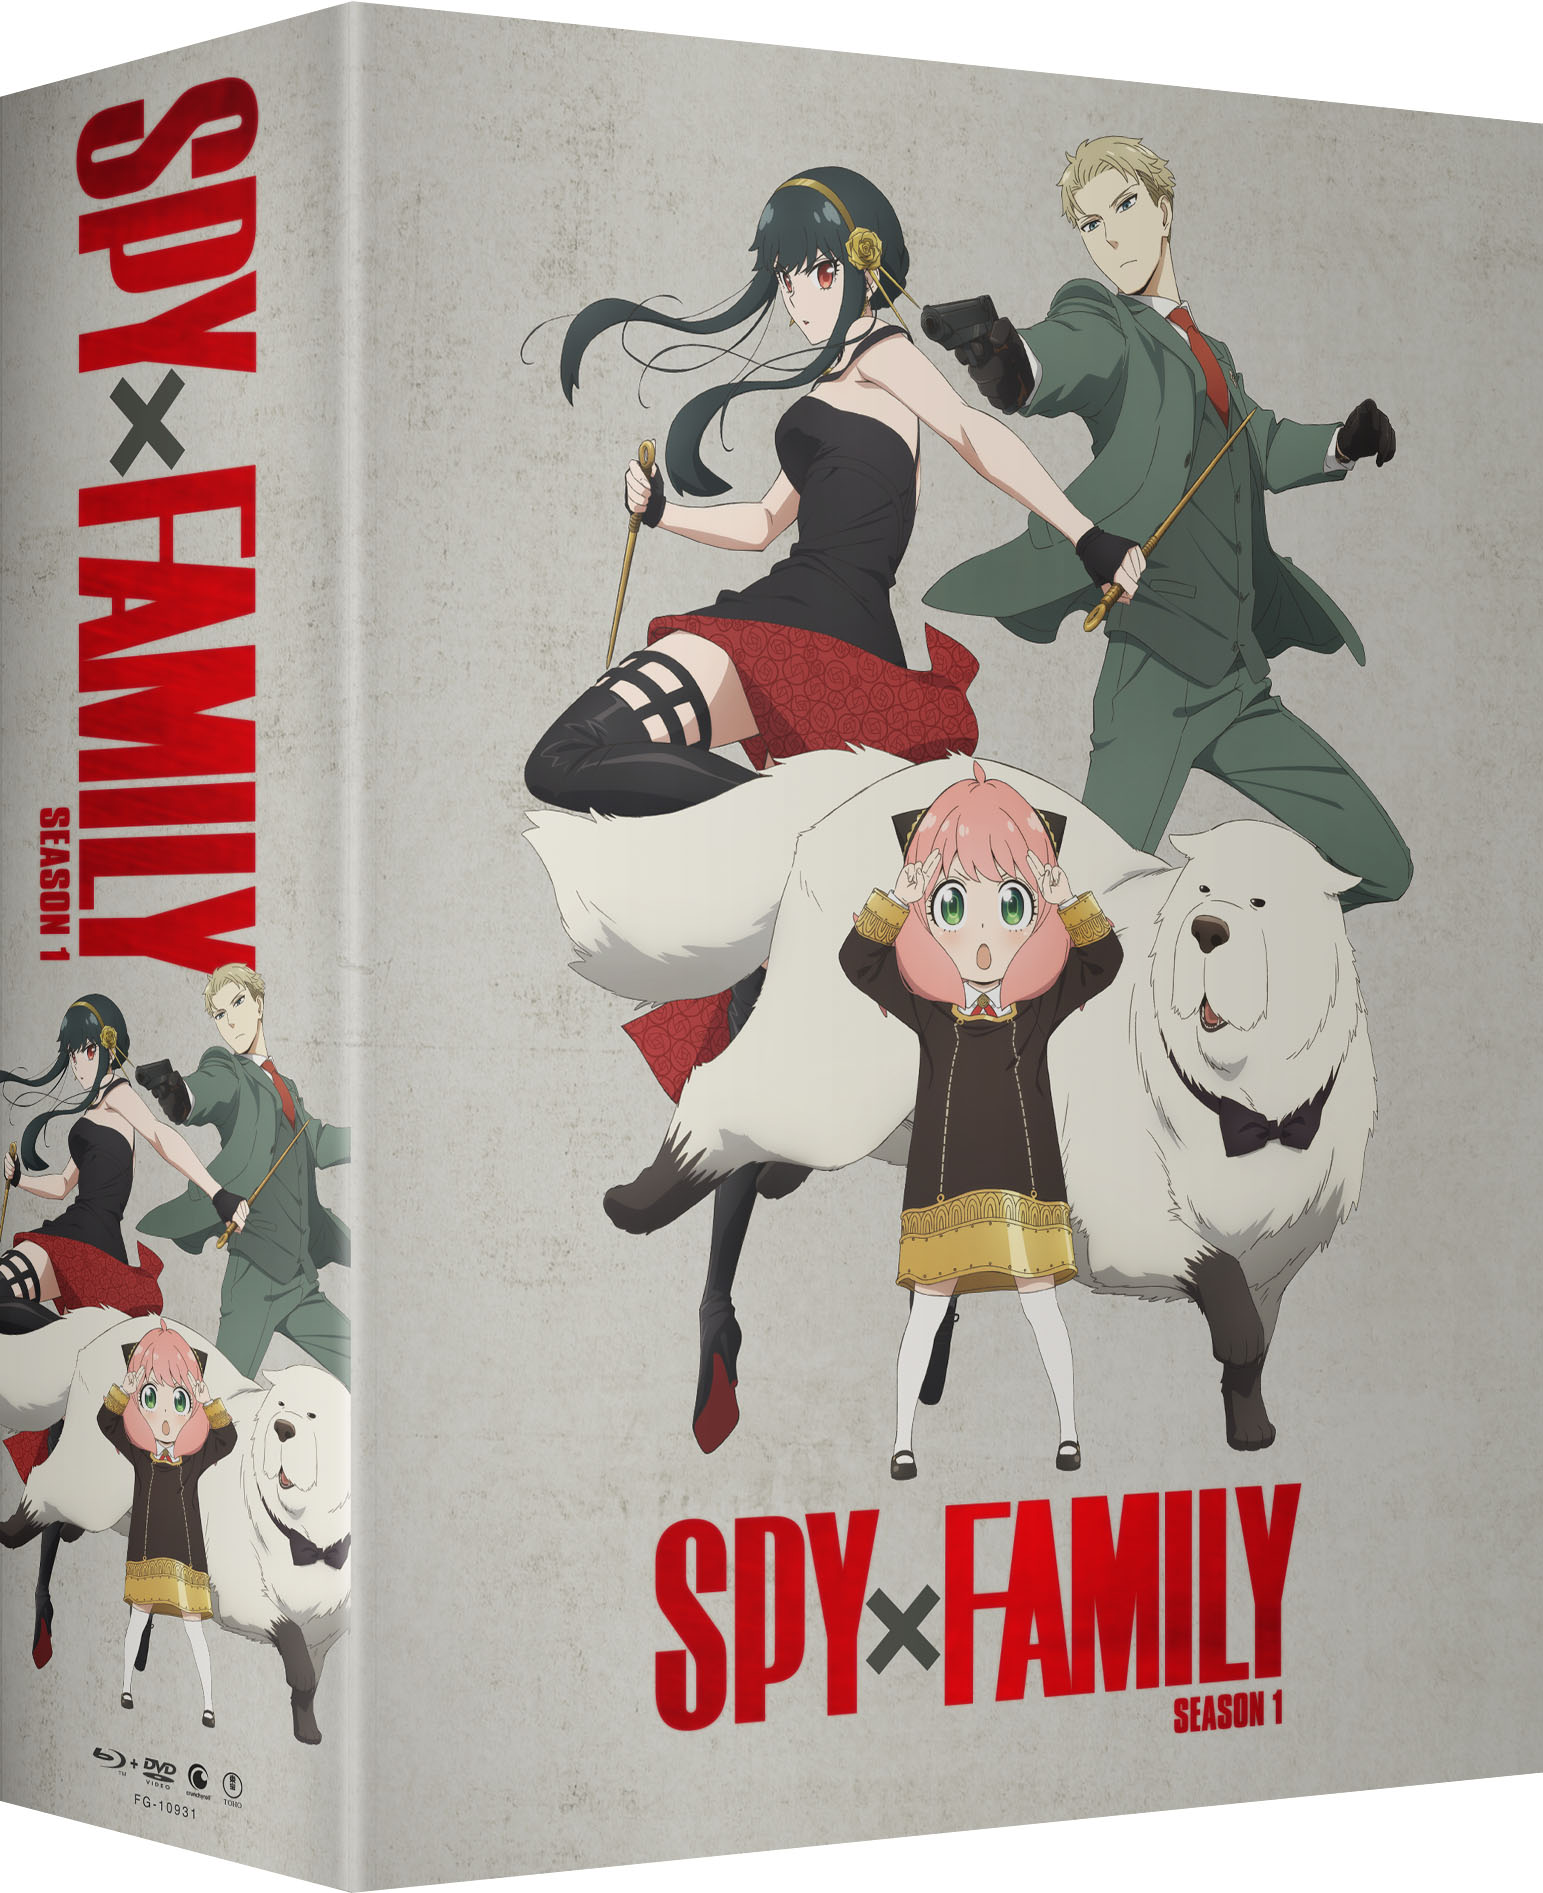 Limited Edition SPY x FAMILY Part 2 Coming To Blu-Ray/DVD From Crunchyroll